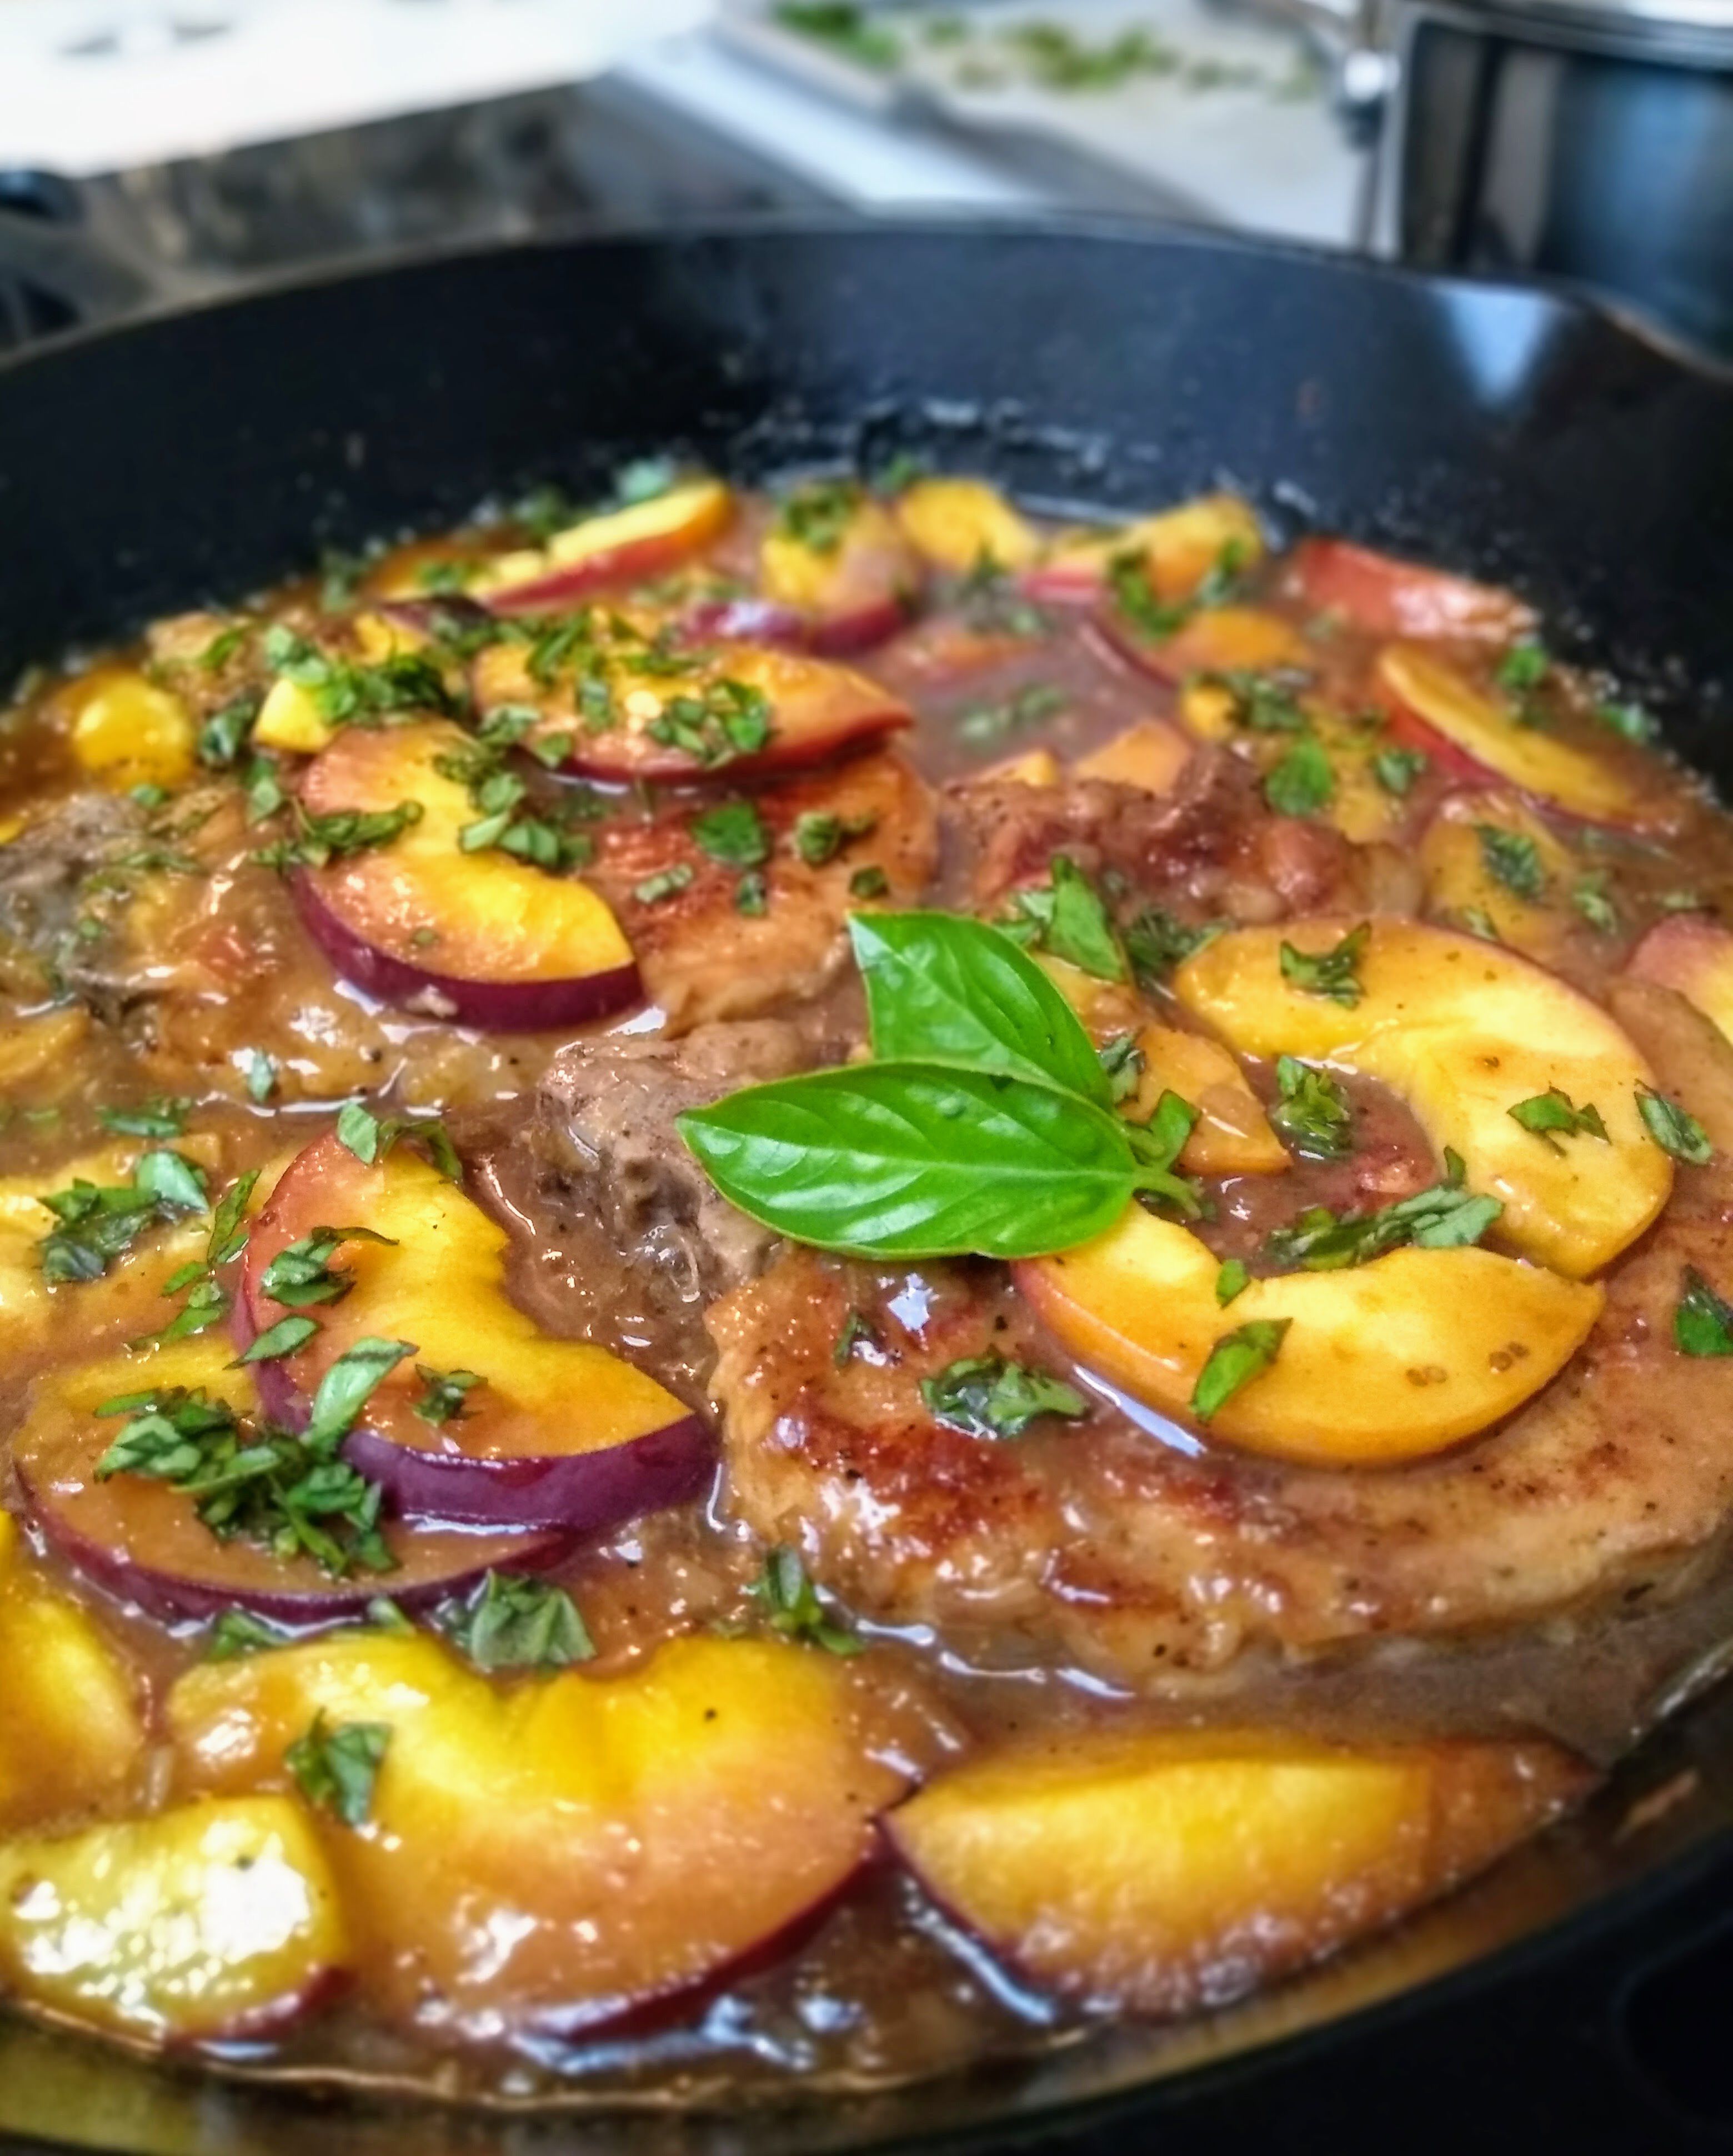 Braised Pork Chops with Peach and Basil